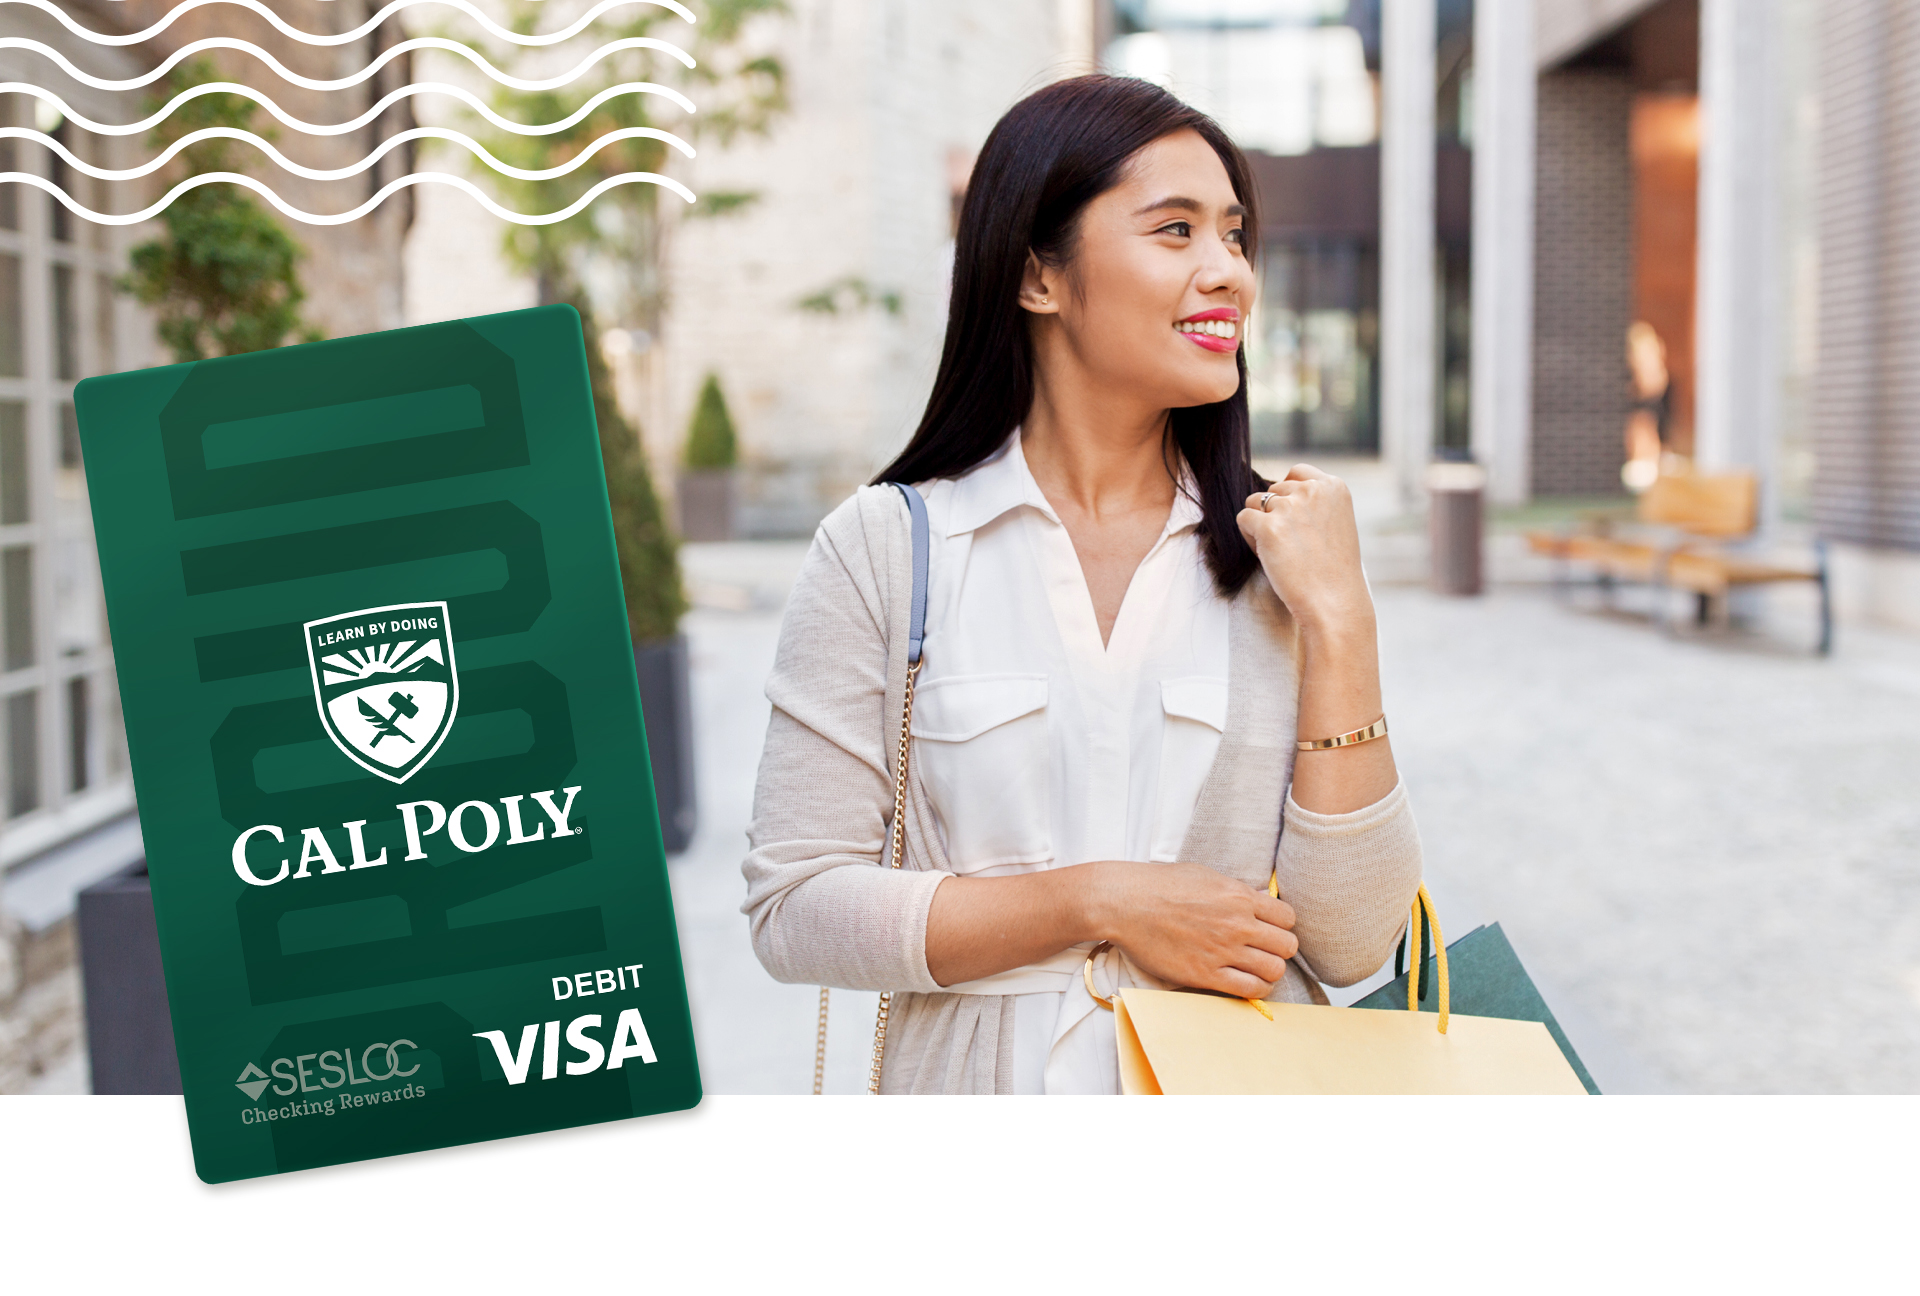 A woman is out shopping with her Cal Poly Visa debit rewards card.